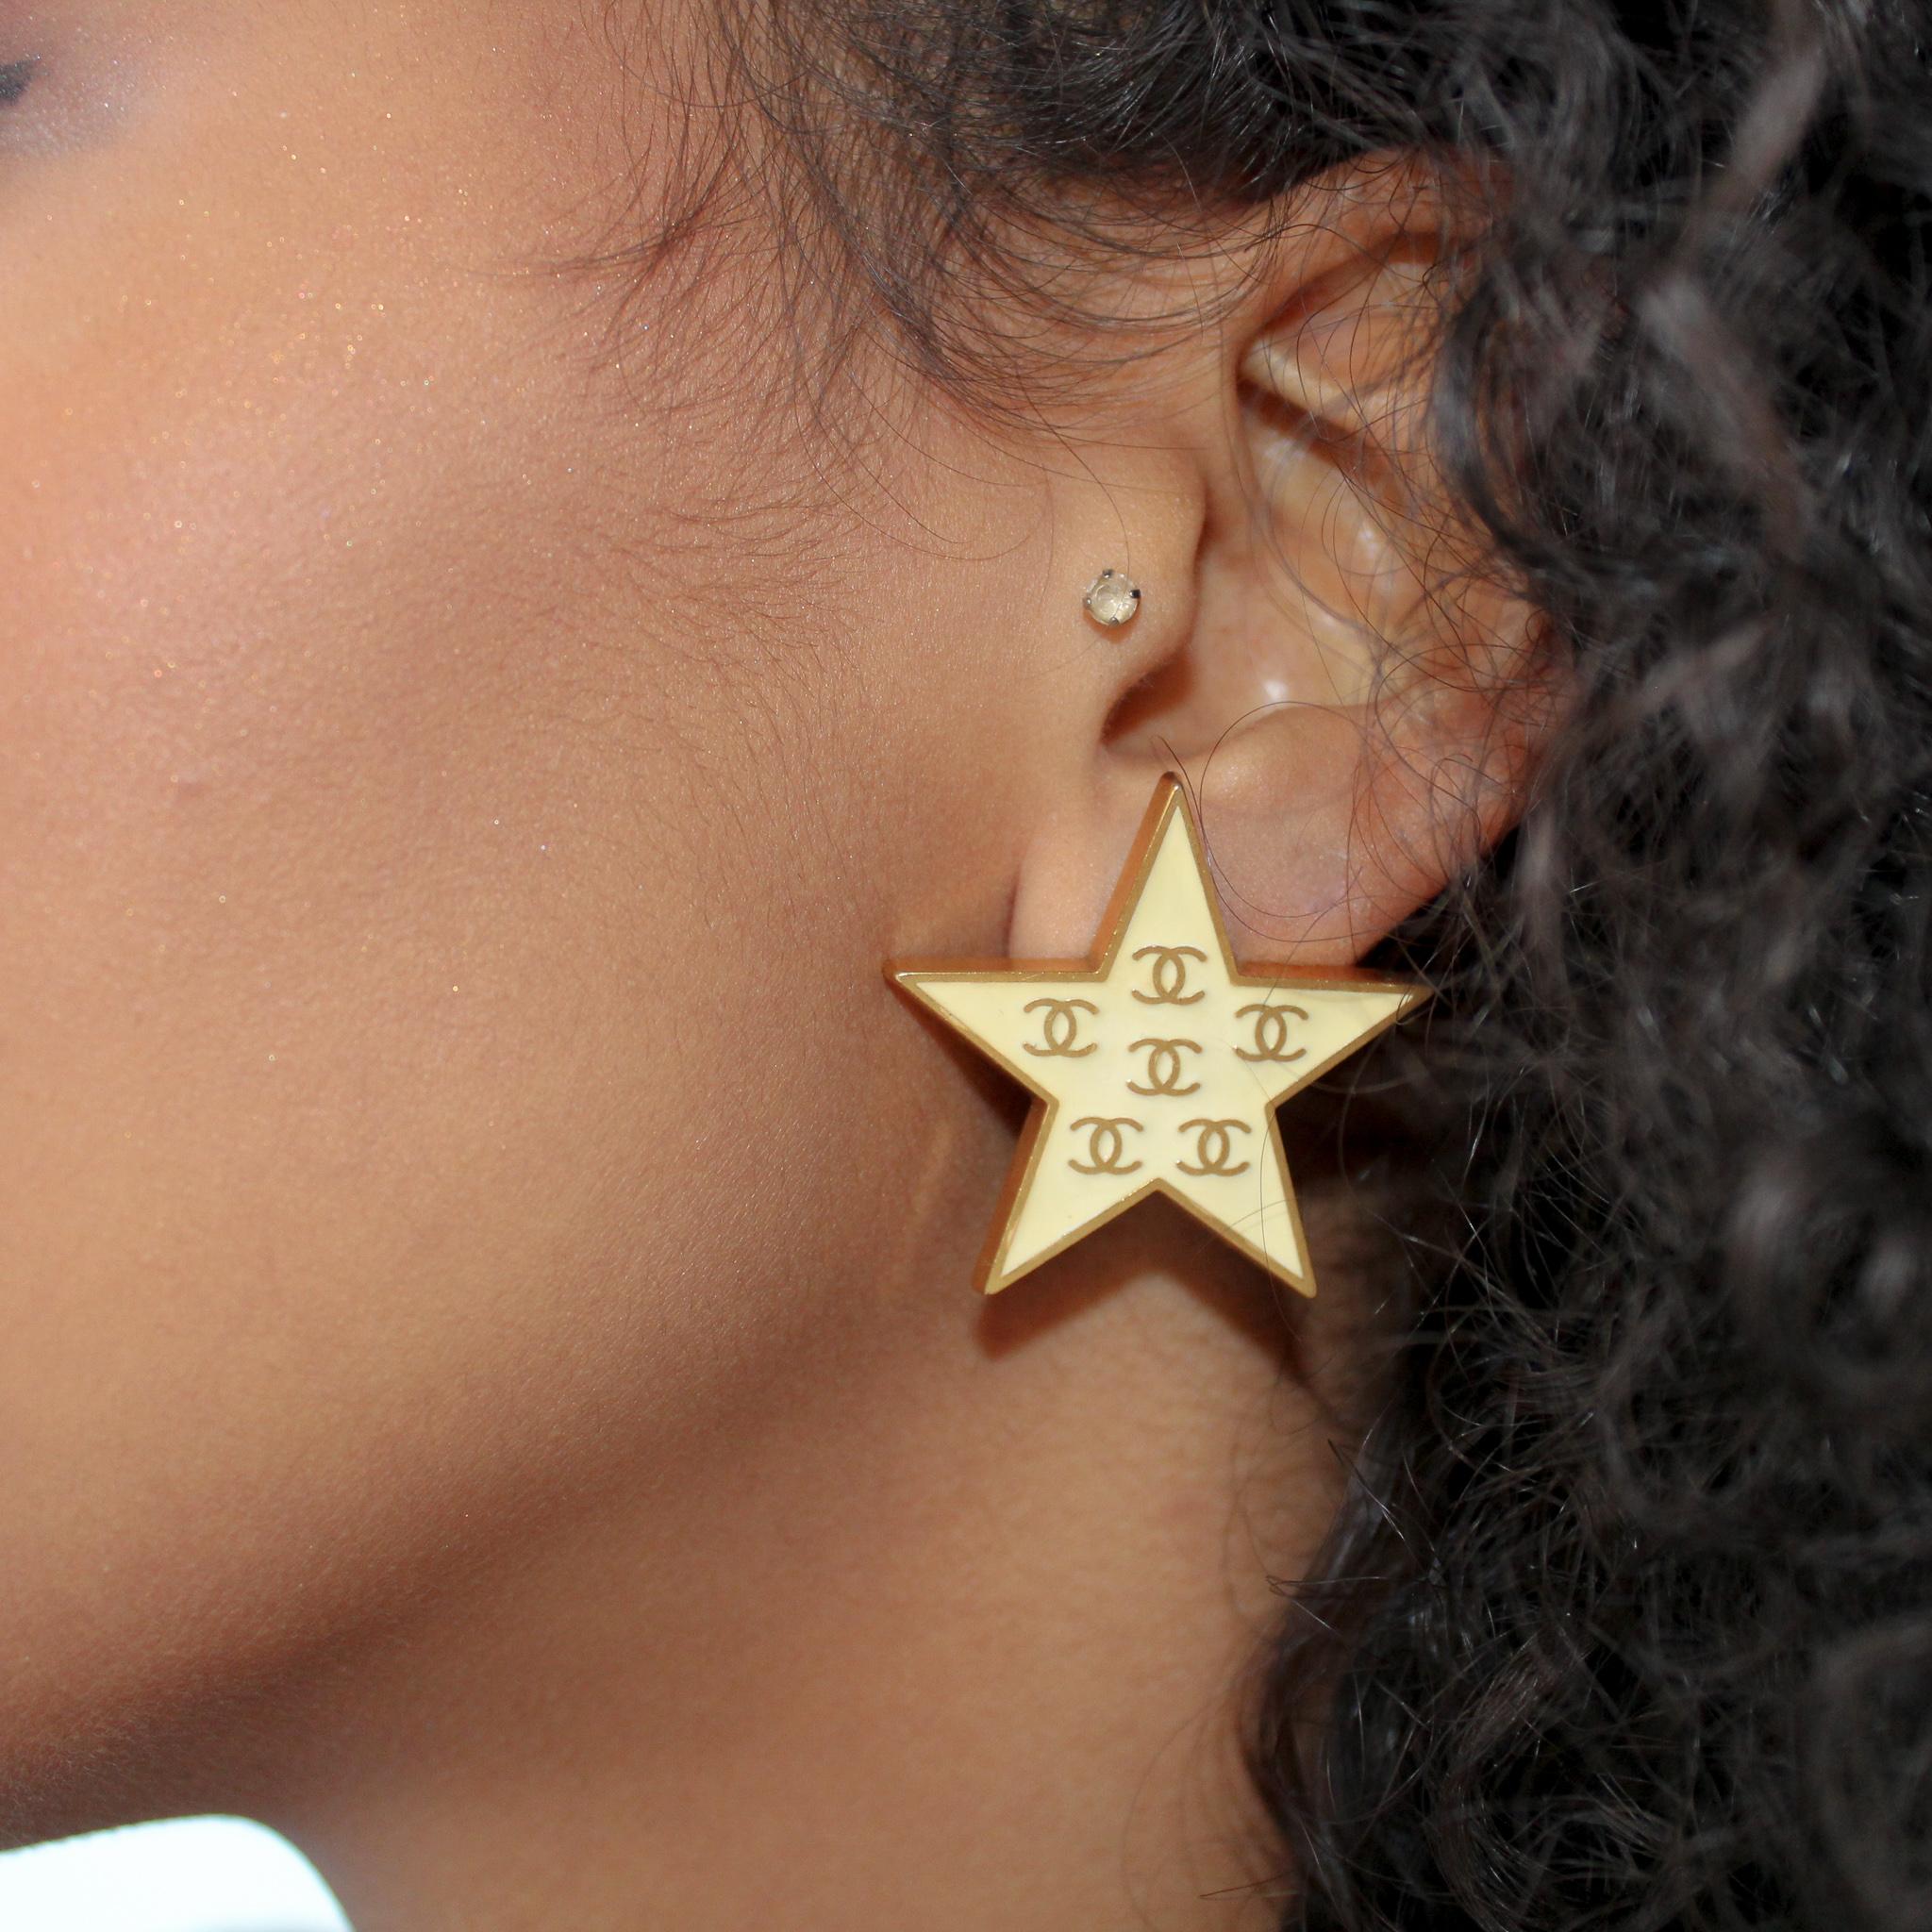 Chanel Vintage Y2K Earrings

Amazing and hard to find clip on earrings from the legendary House of Chanel.  

Made in France in 2001 for the Spring Summer collection, these incredible star shaped earrings are crafted from high quality gold plated